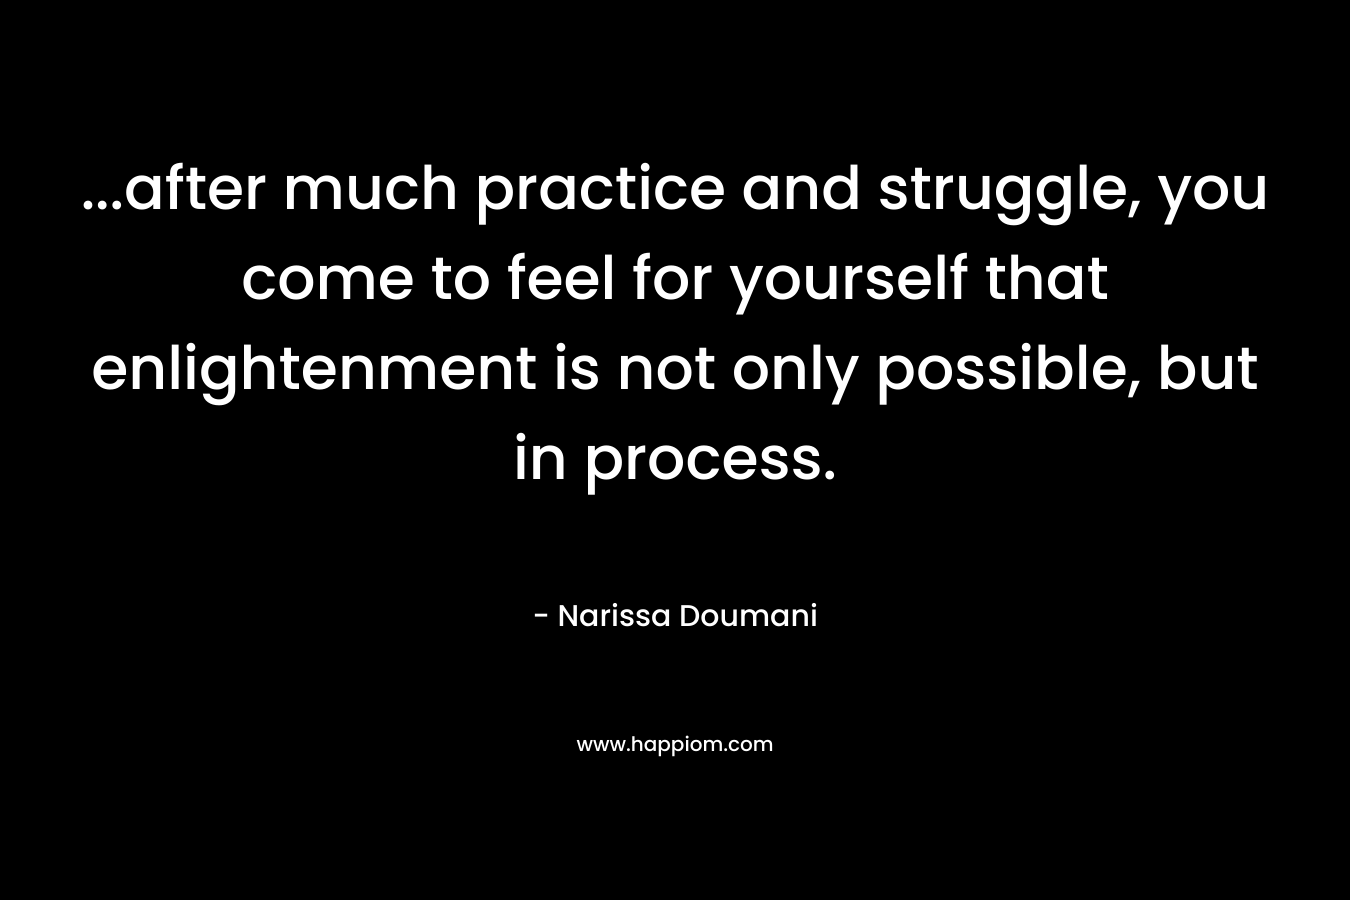 ...after much practice and struggle, you come to feel for yourself that enlightenment is not only possible, but in process.